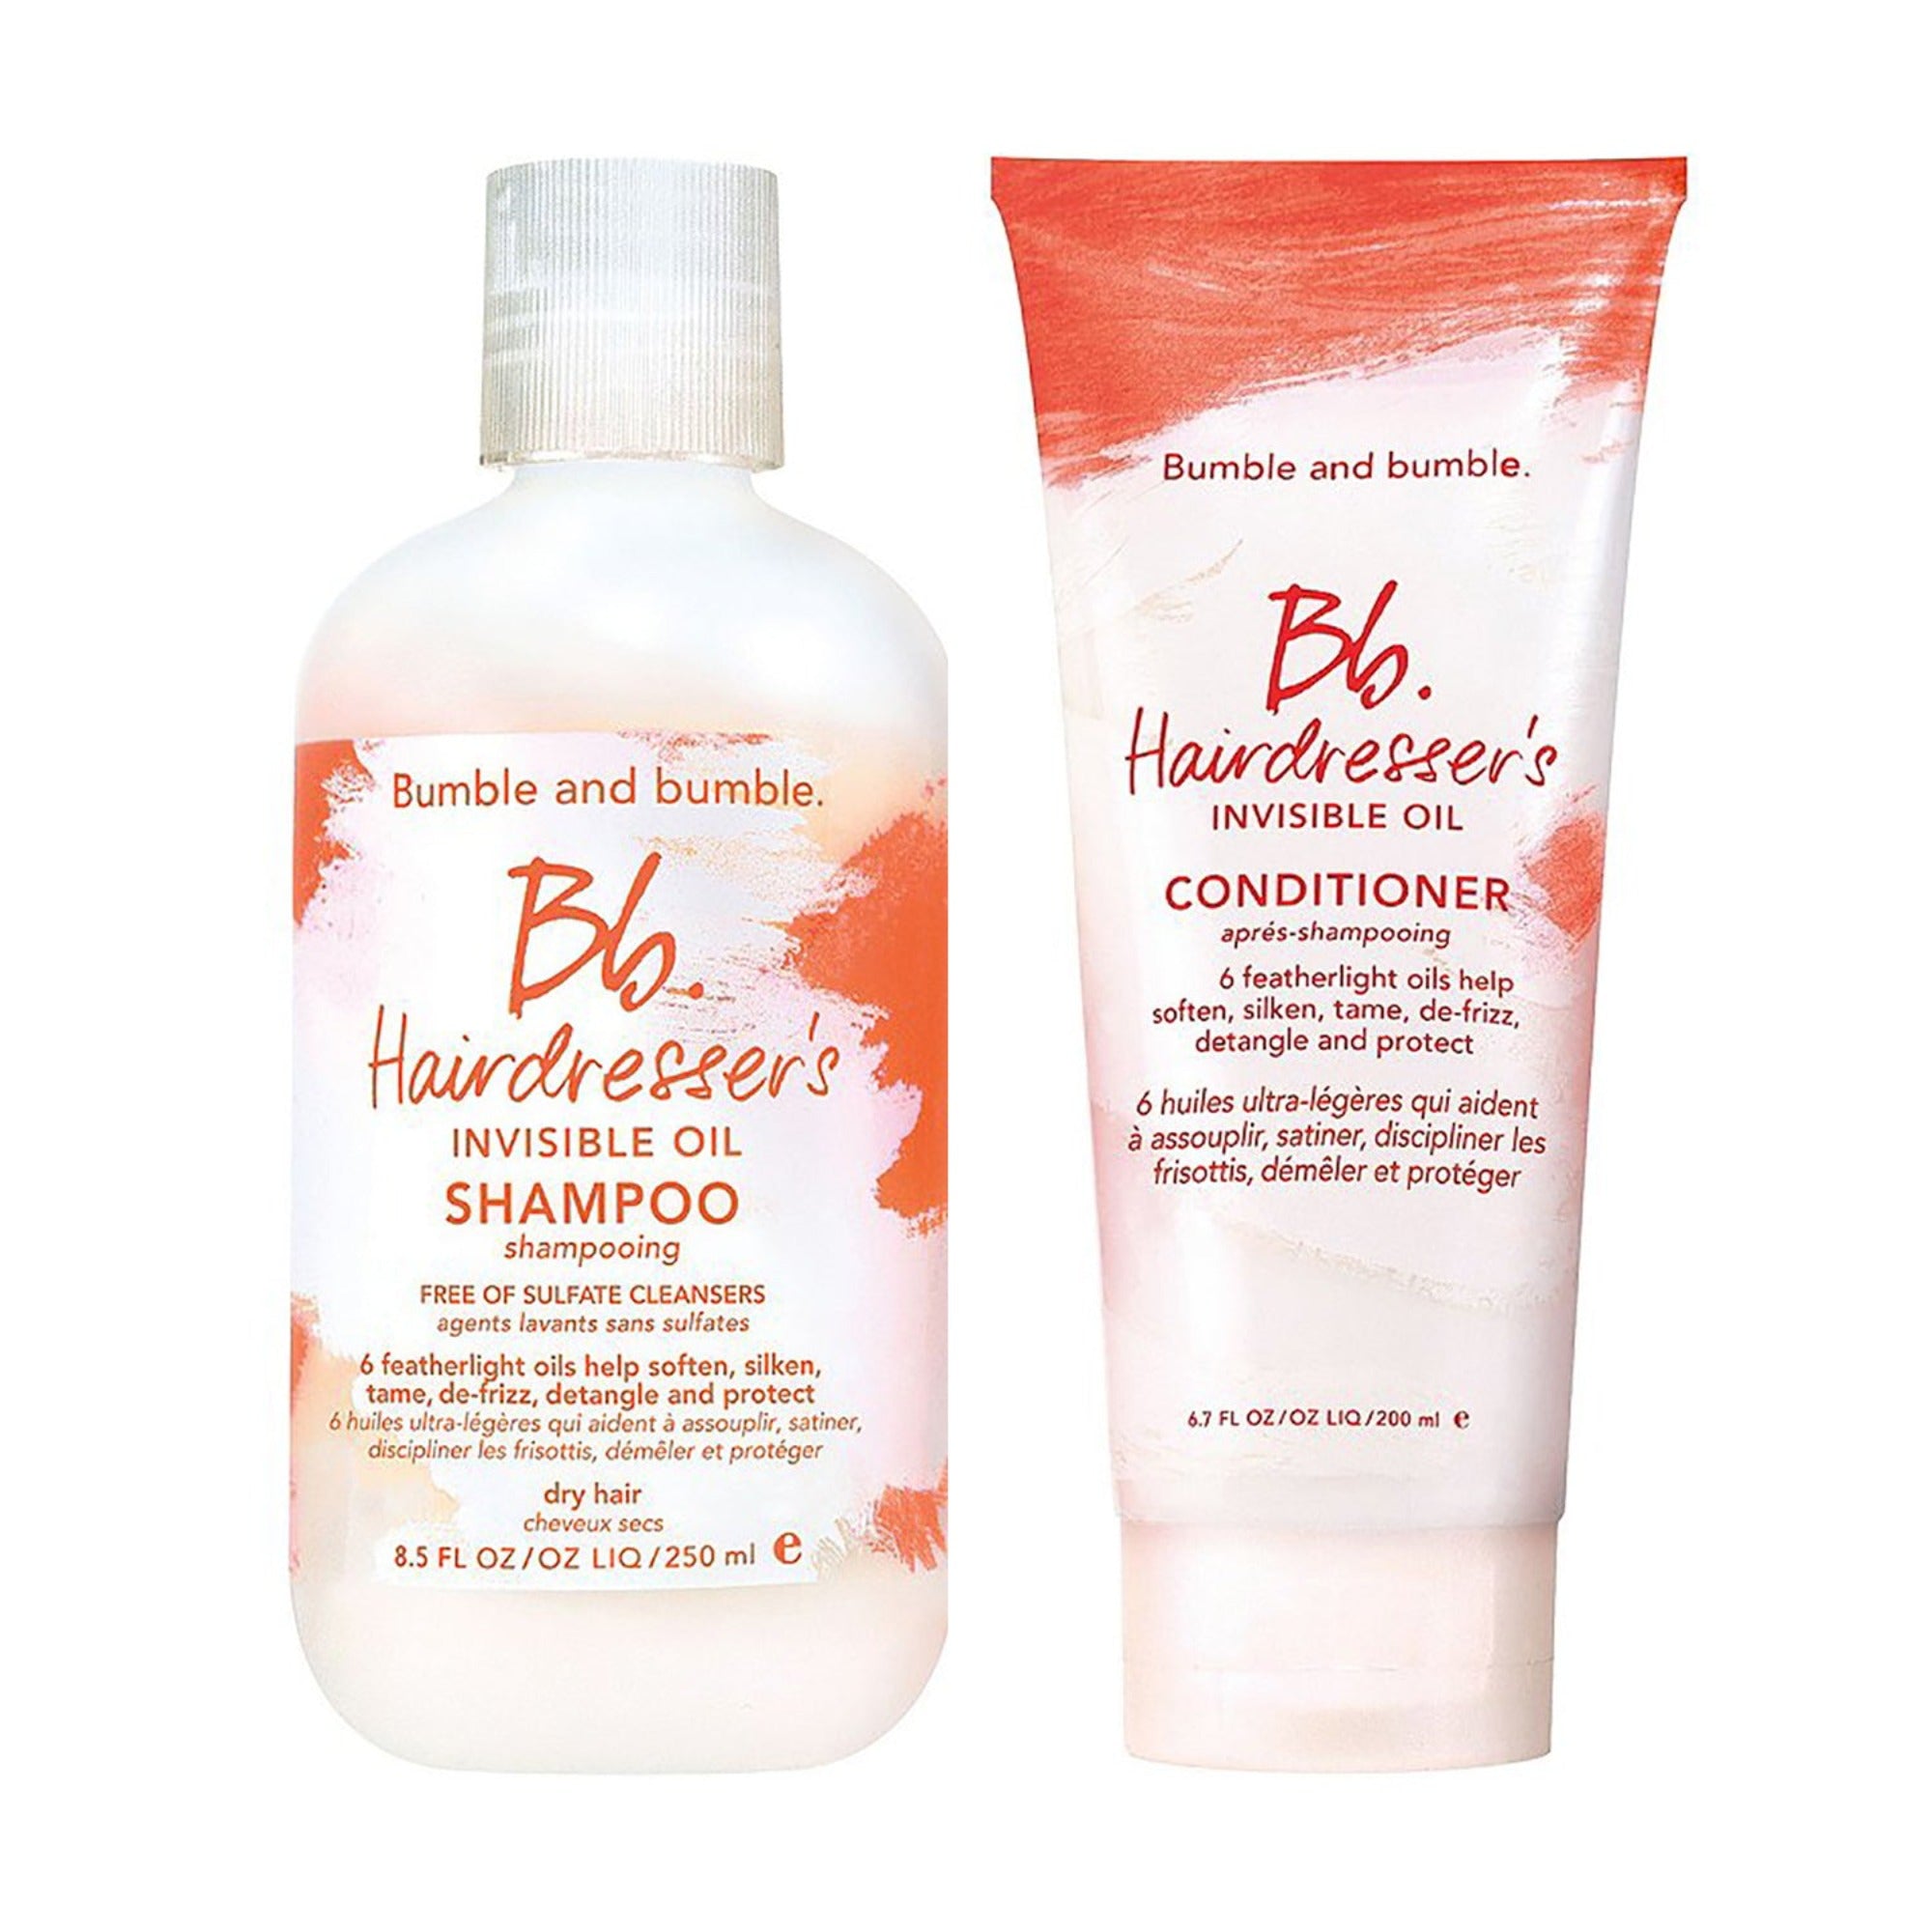 Bumble and bumble Hairdresser's Invisible Oil Shampoo 8oz and Conditioner 6.7oz-DUO ($69 Value)